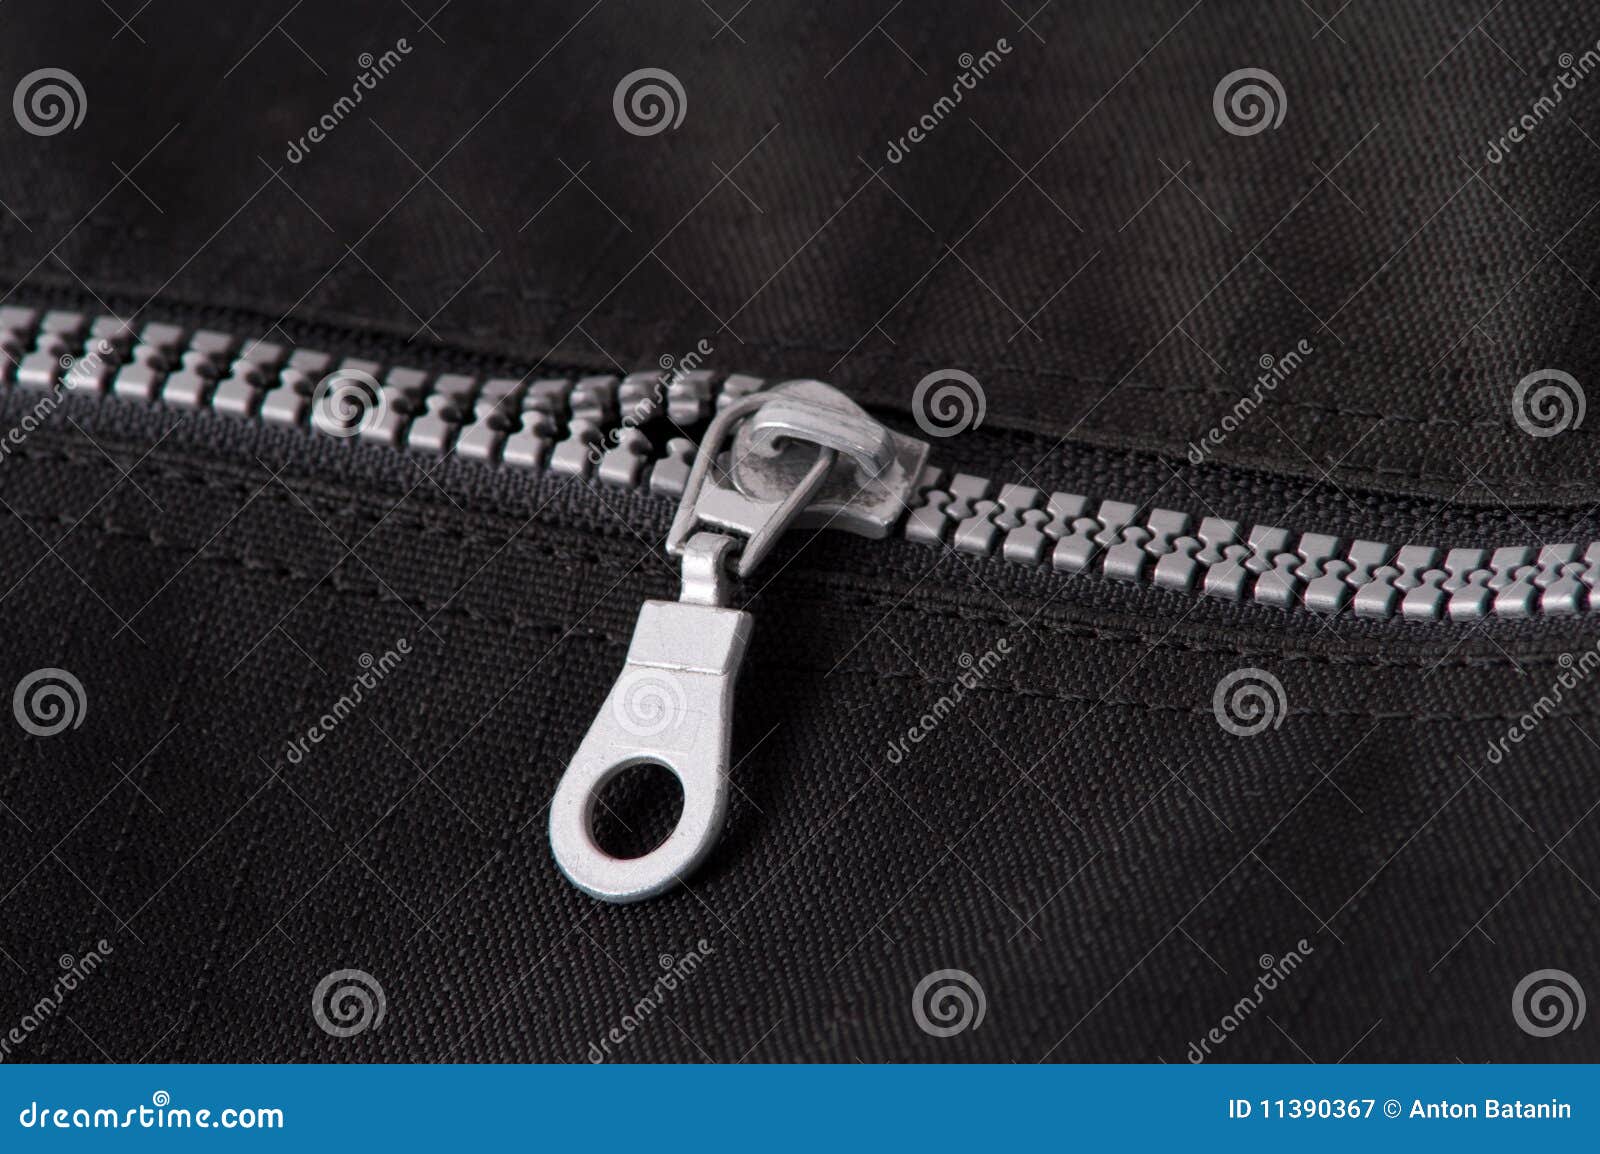 Silver zipper stock image. Image of clothing, empty, light - 11390367